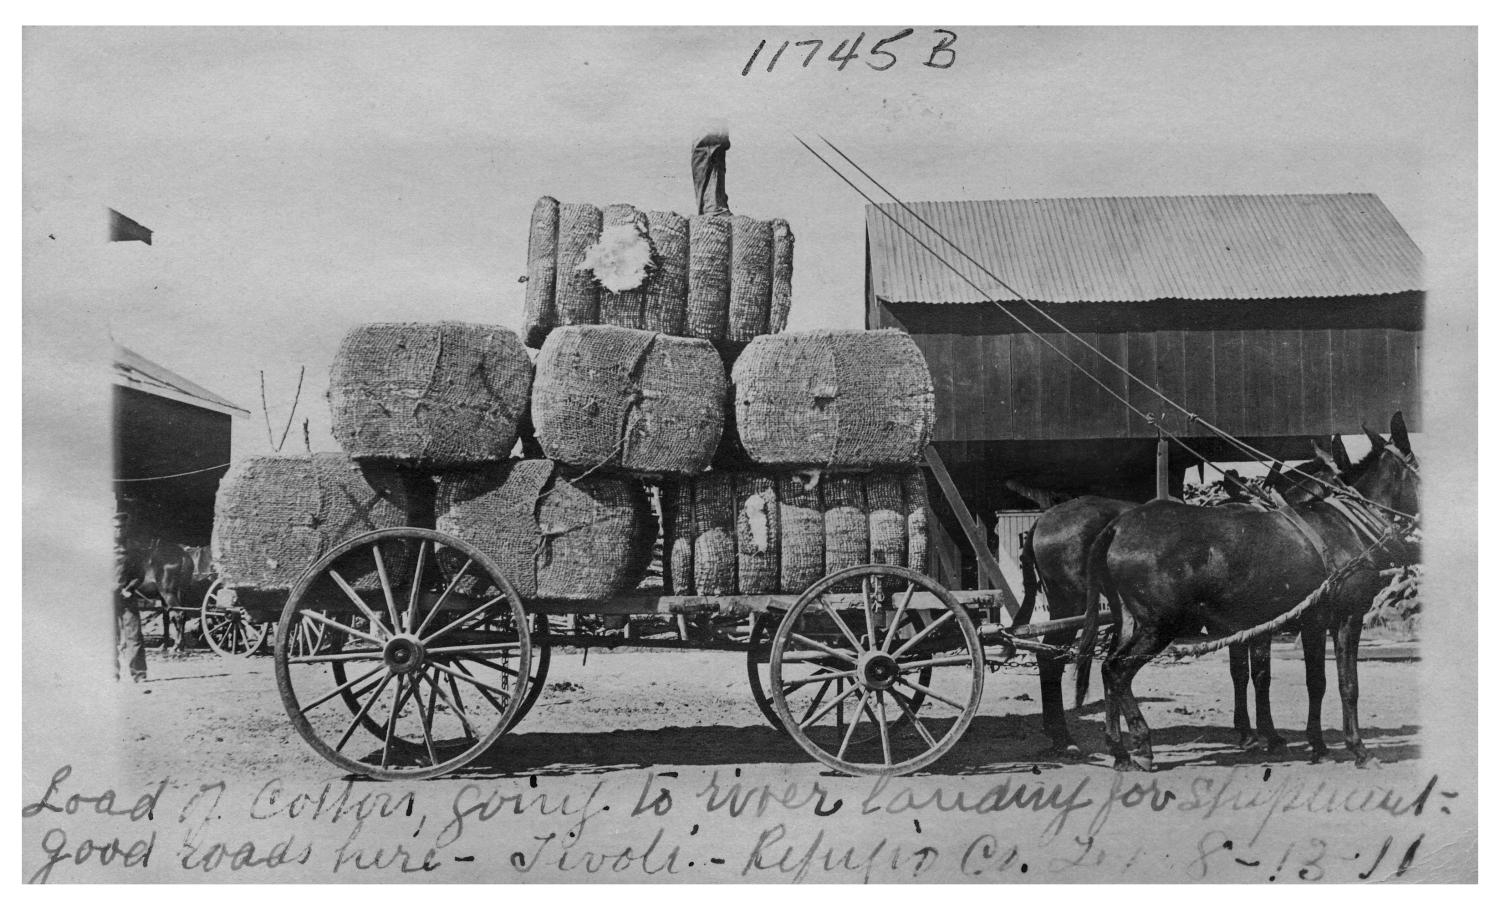 Load of cotton going to river landing for shipment--good roads here
                                                
                                                    [Sequence #]: 1 of 1
                                                